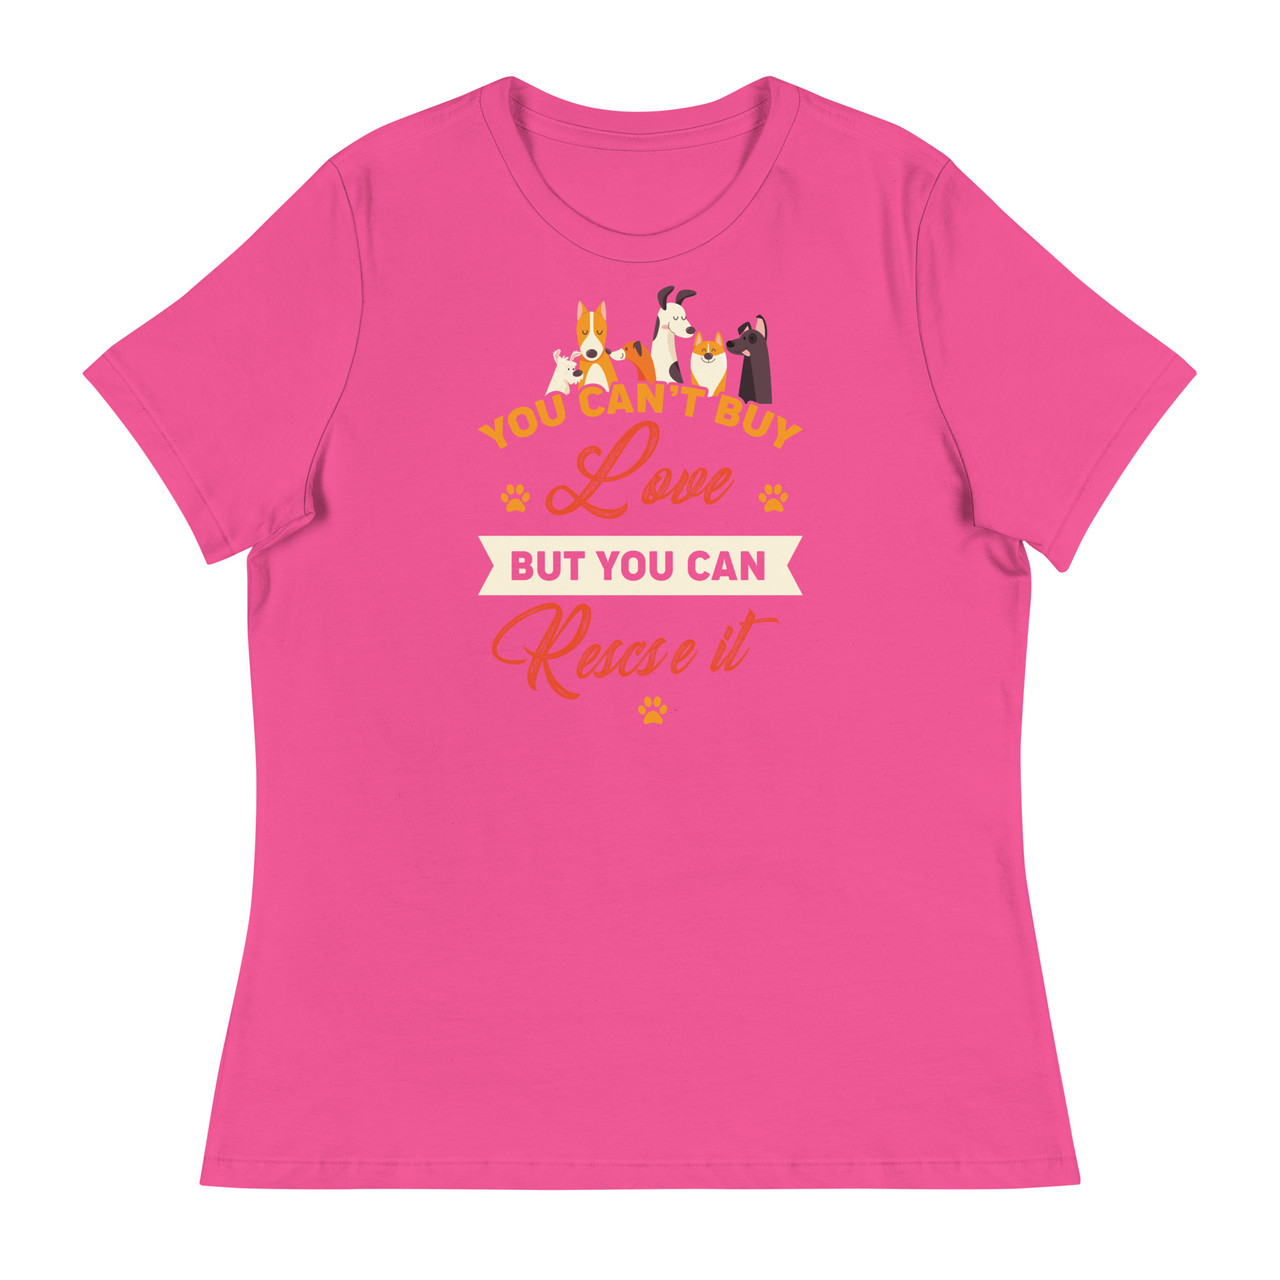 You Can't Buy Love But You Can Rescue It Women's Relaxed T-Shirt - Bella + Canvas 6400 